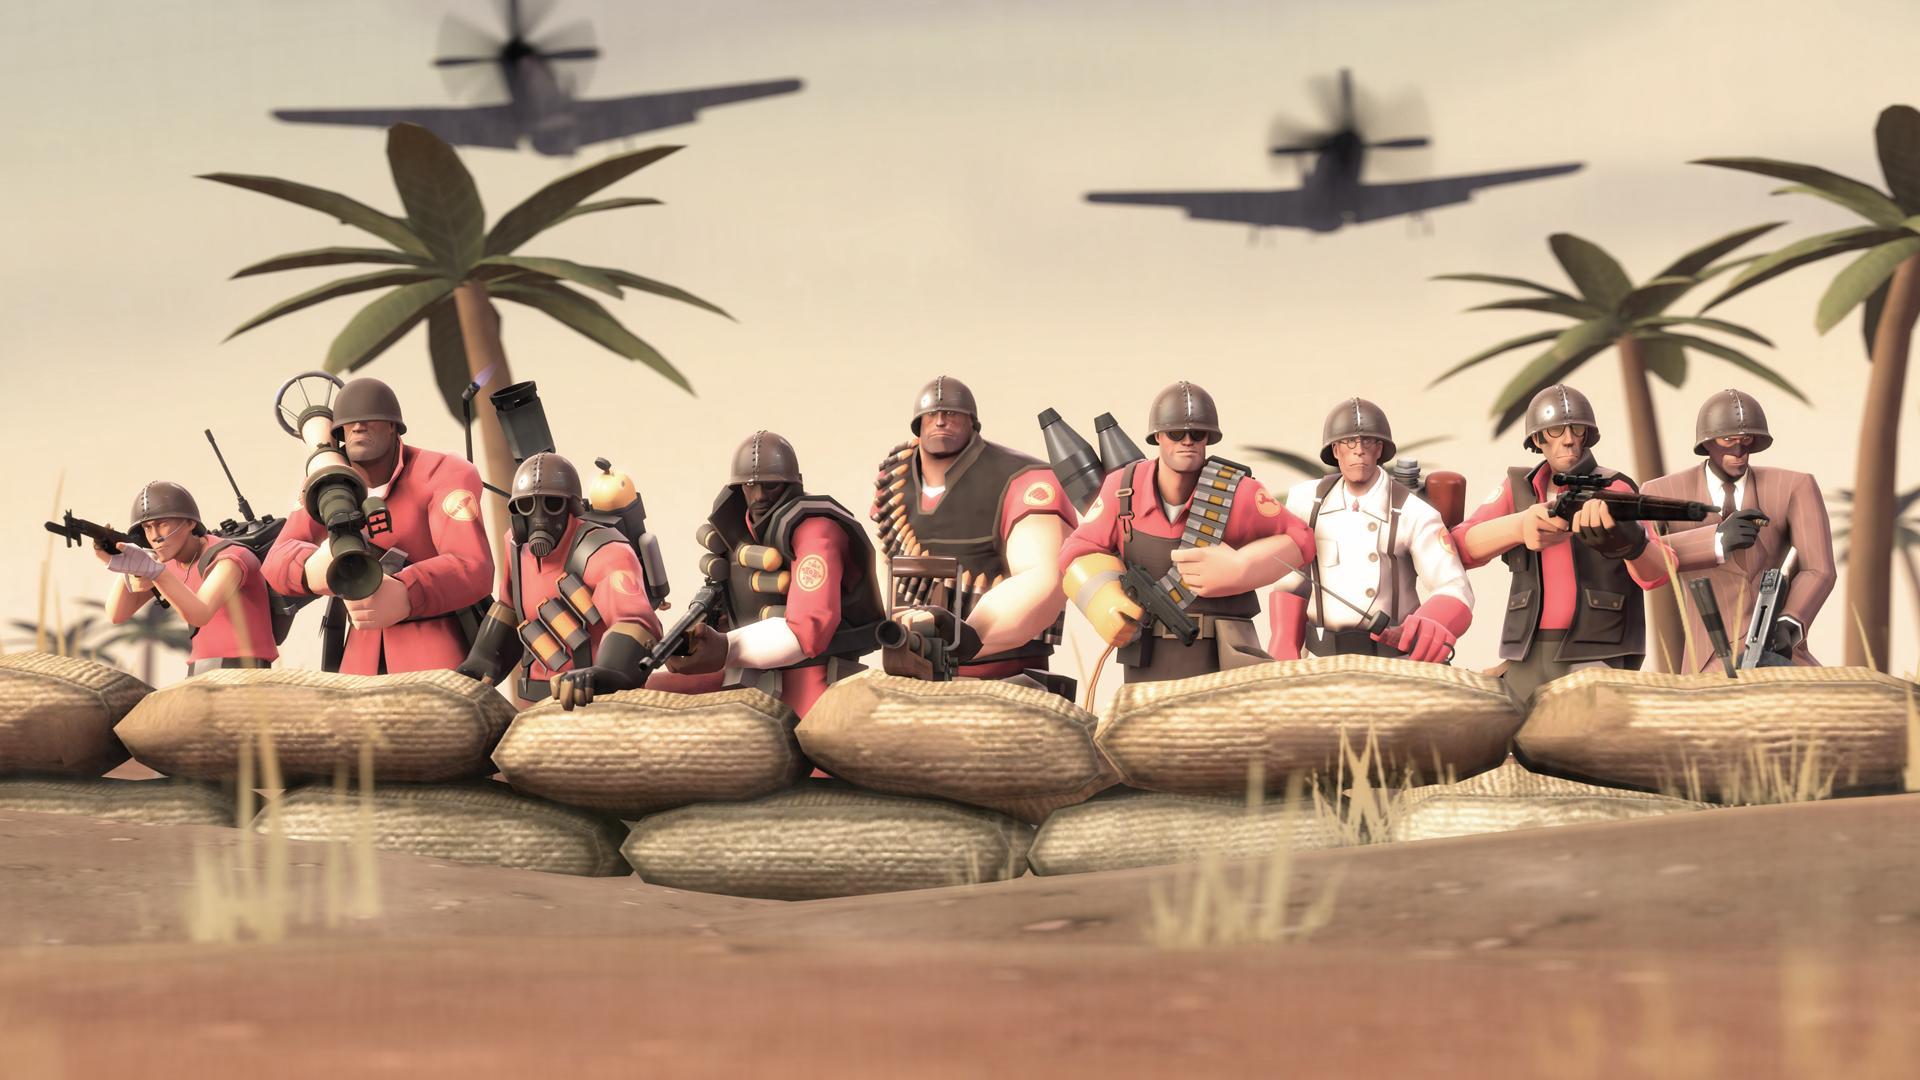 Cool Team Fortress 2 Wallpaper GB Entertained By Our